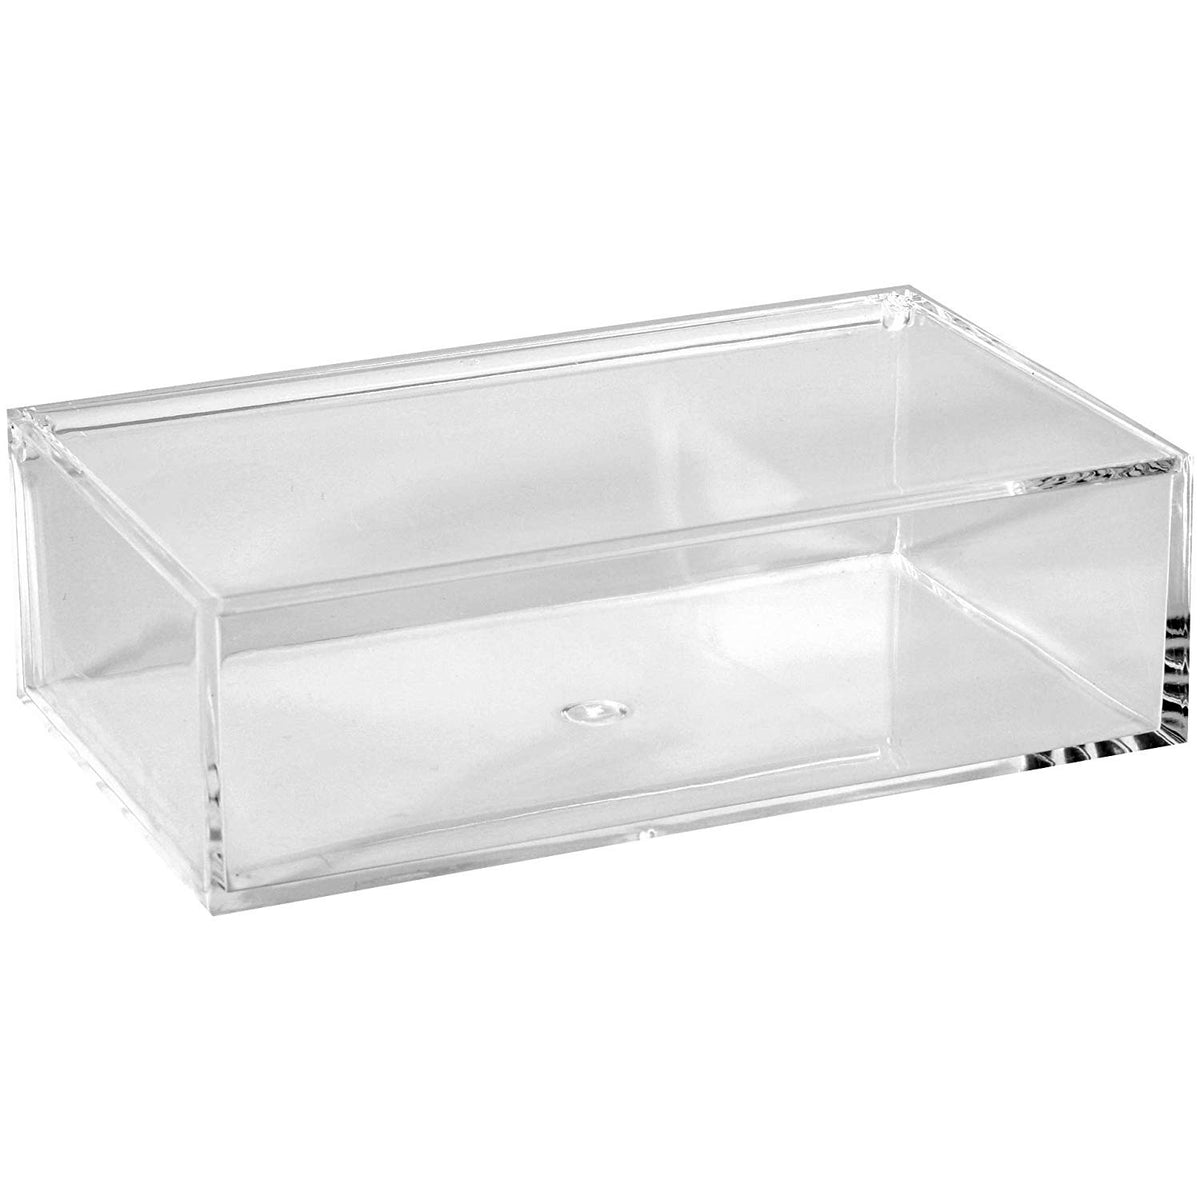 Hammont Clear Acrylic Boxes - 6 Pack - 2.25''x2.25''x2.25'' - Small Cube  Lucite Boxes for Gifts, Wed…See more Hammont Clear Acrylic Boxes - 6 Pack 